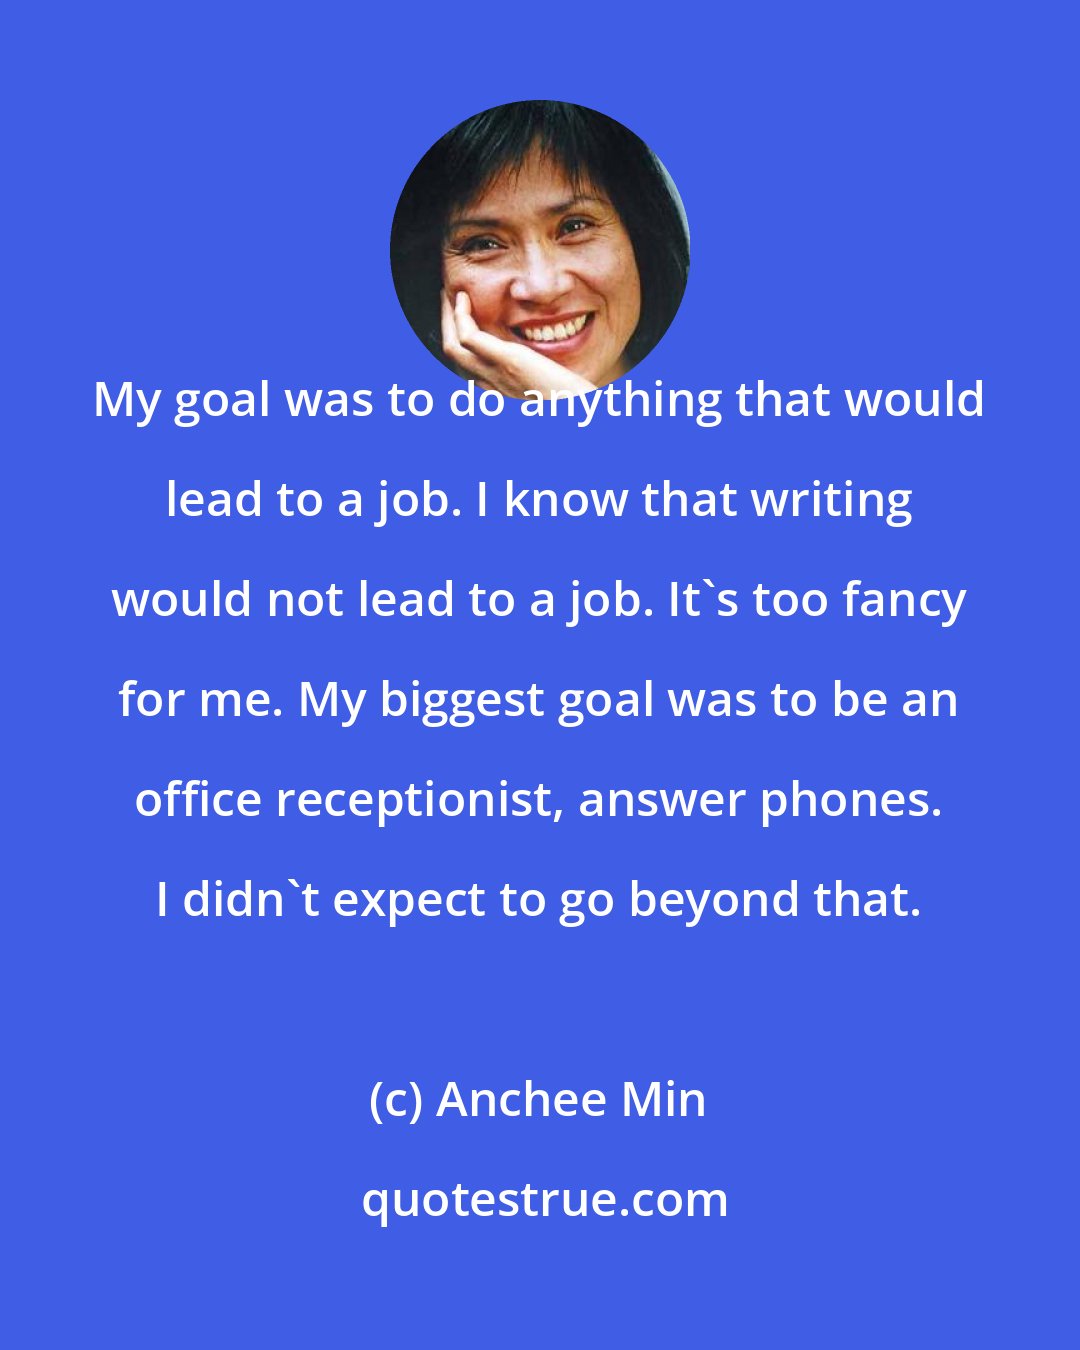 Anchee Min: My goal was to do anything that would lead to a job. I know that writing would not lead to a job. It's too fancy for me. My biggest goal was to be an office receptionist, answer phones. I didn't expect to go beyond that.